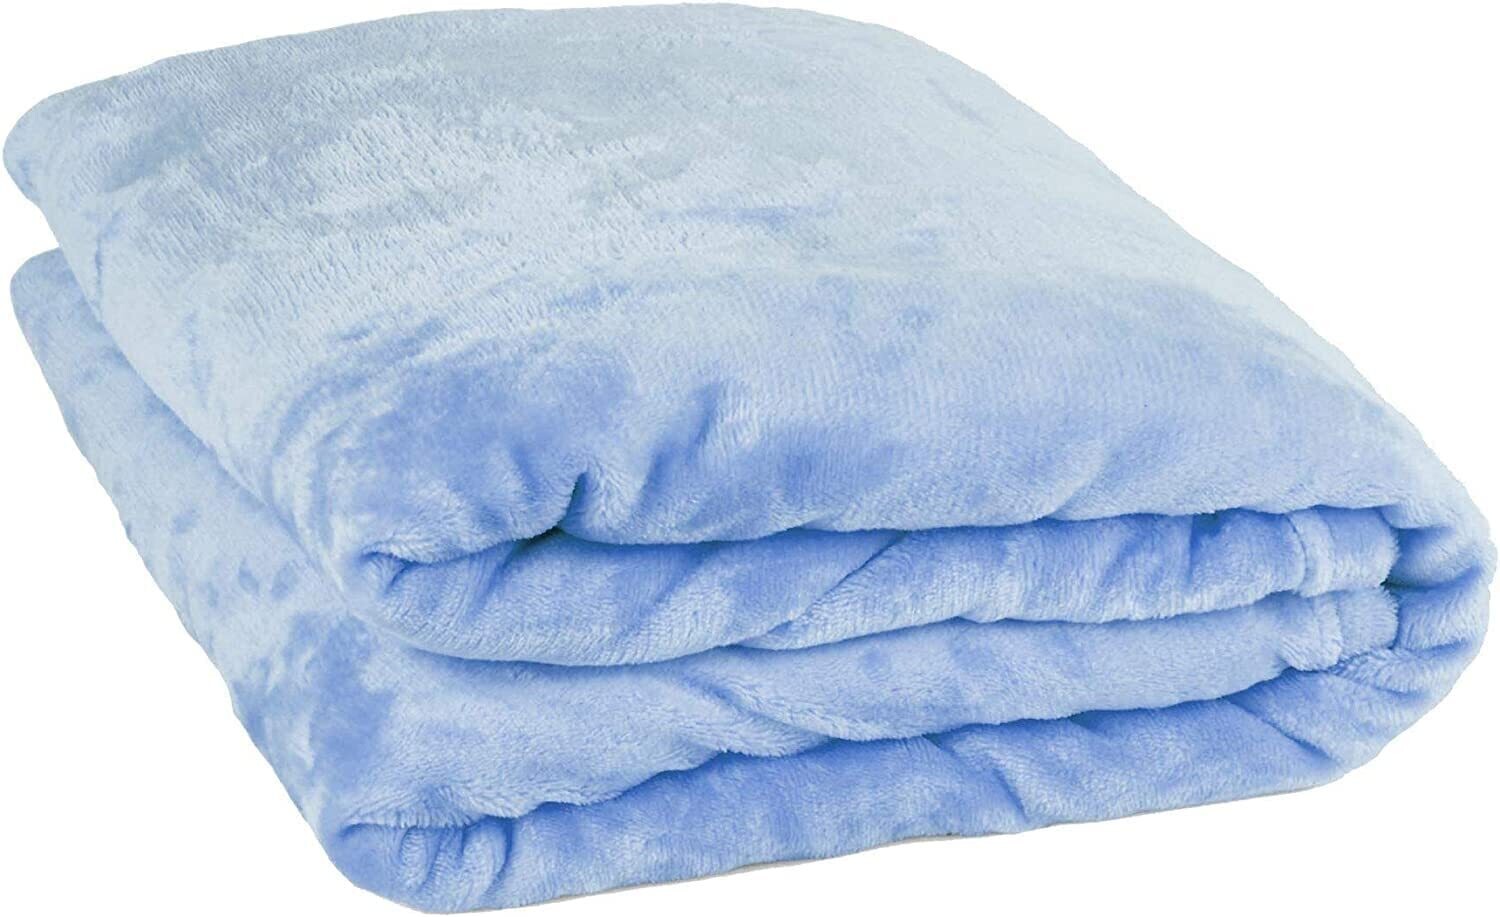 Mintra Home Blanket Super Soft, 100% Polyester Light blue 180X220CM Lightweight Warm Fleece Blanket Throw Bed Cover Couch Cover